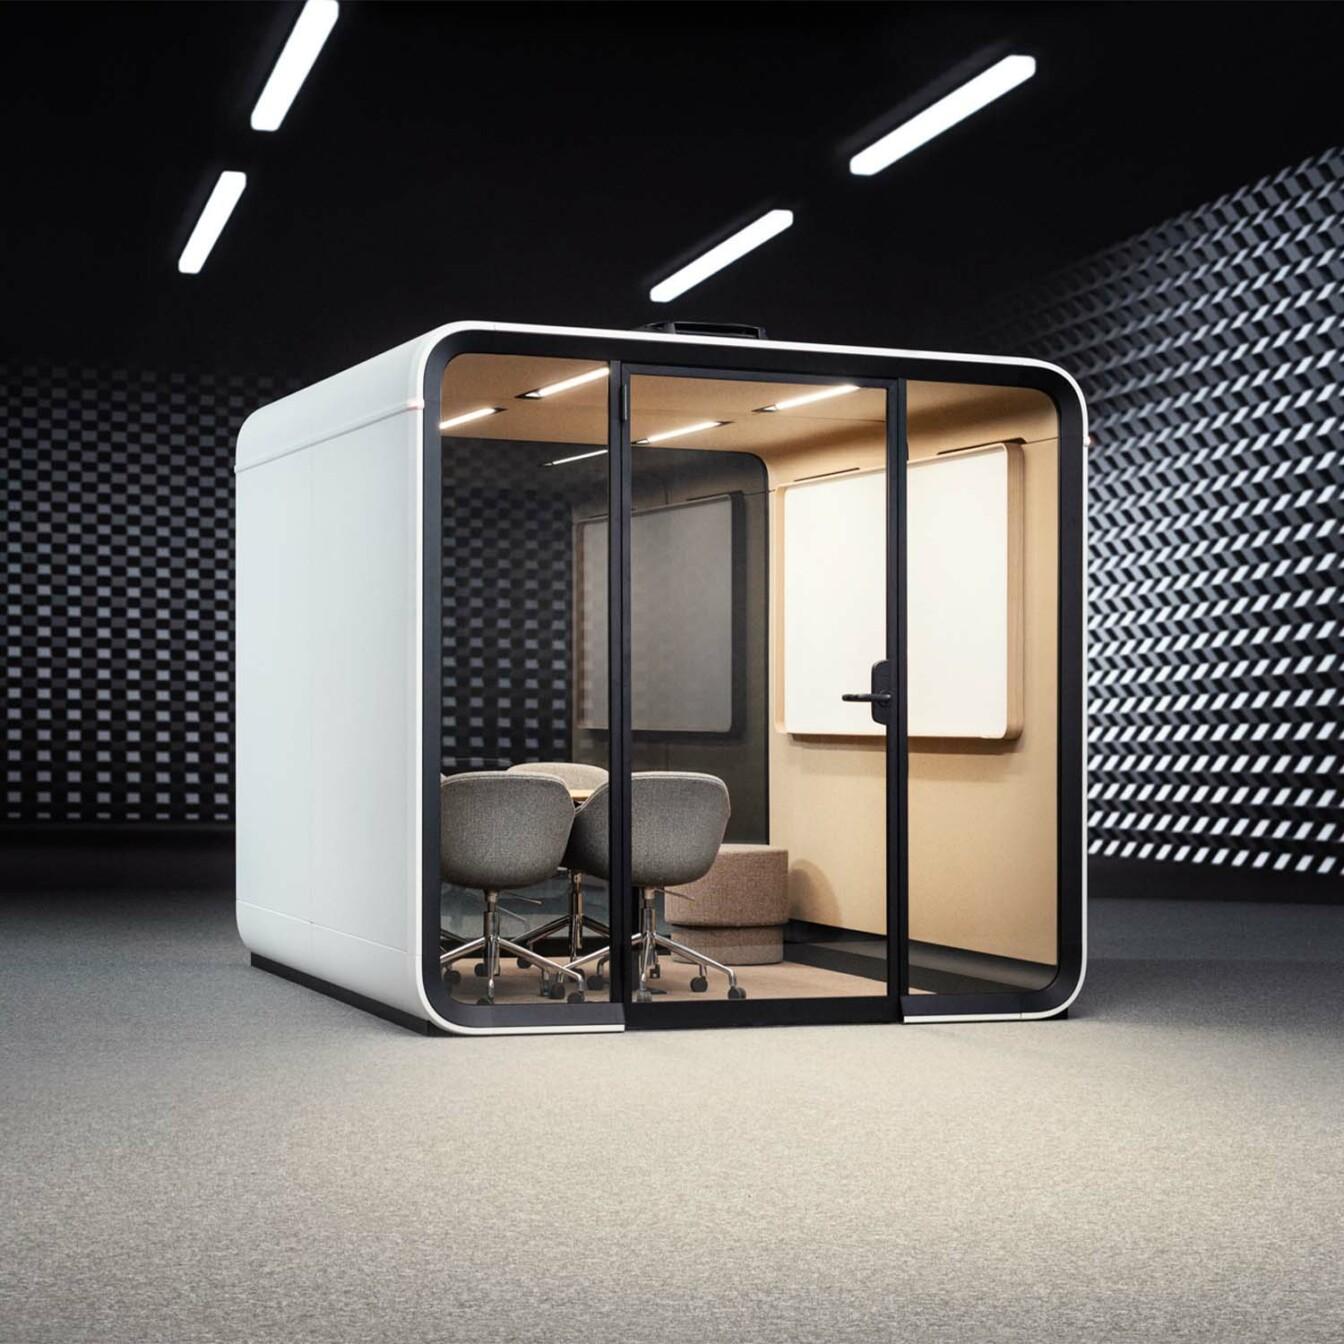 Framery Six smart meeting room in an acoustic environment